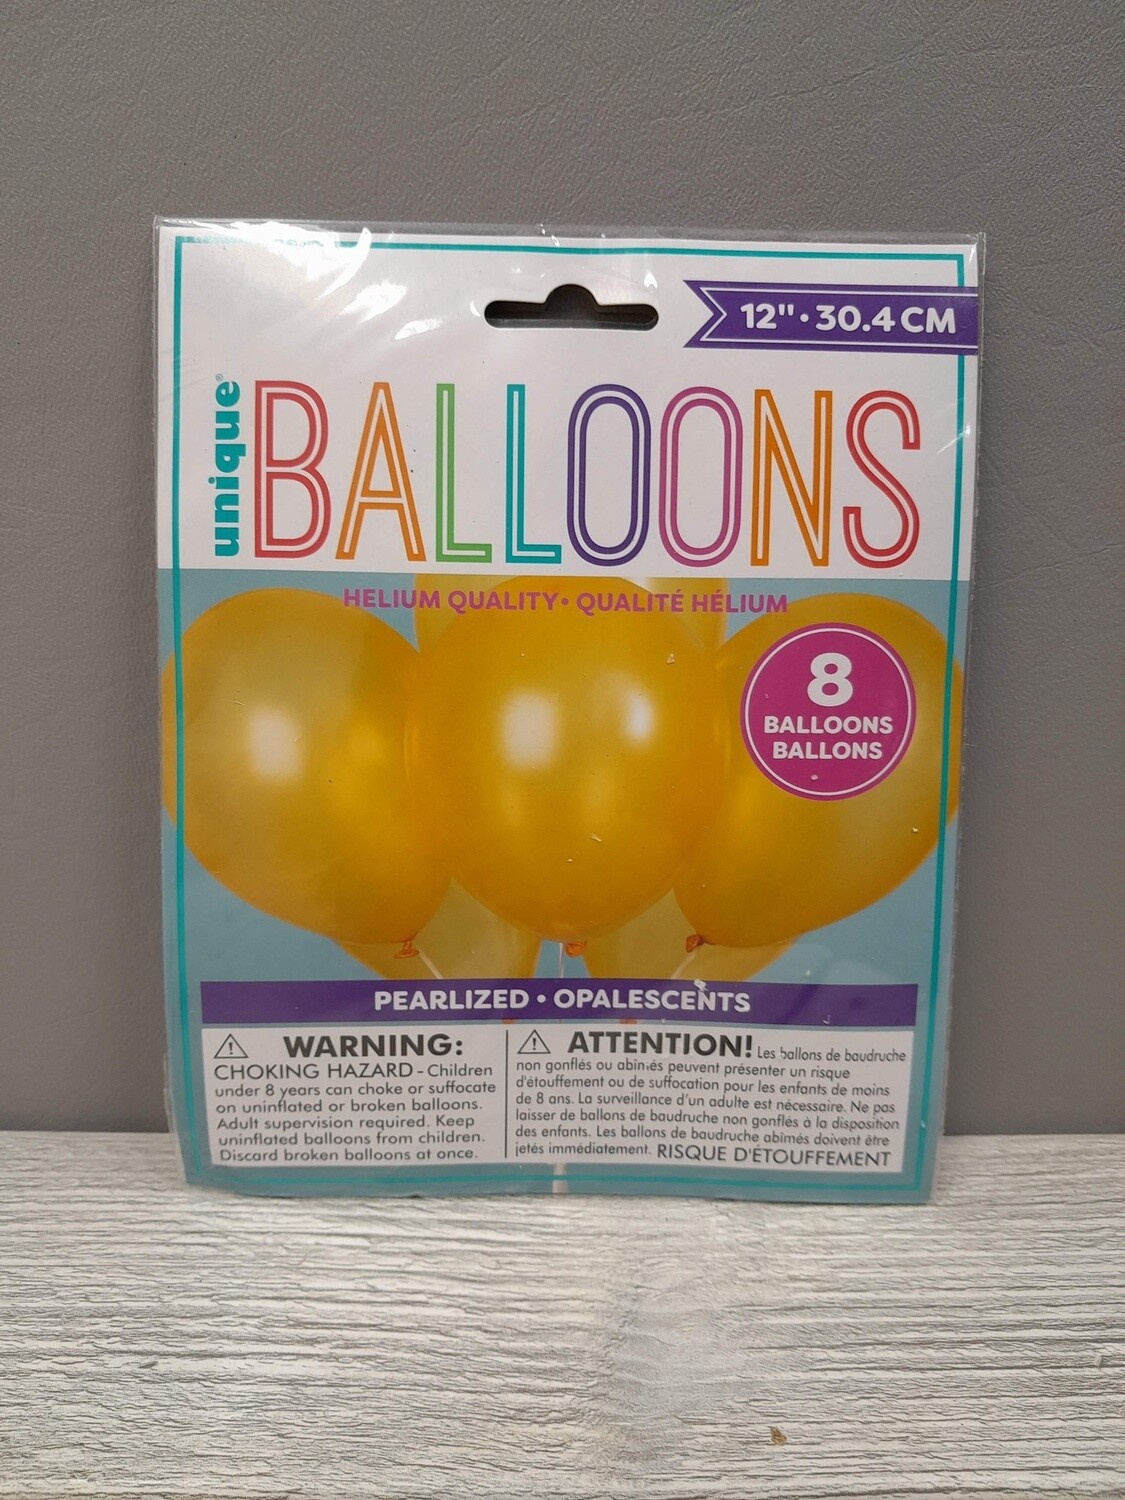 8-12" PEARLIZED BALLOONS GOLD